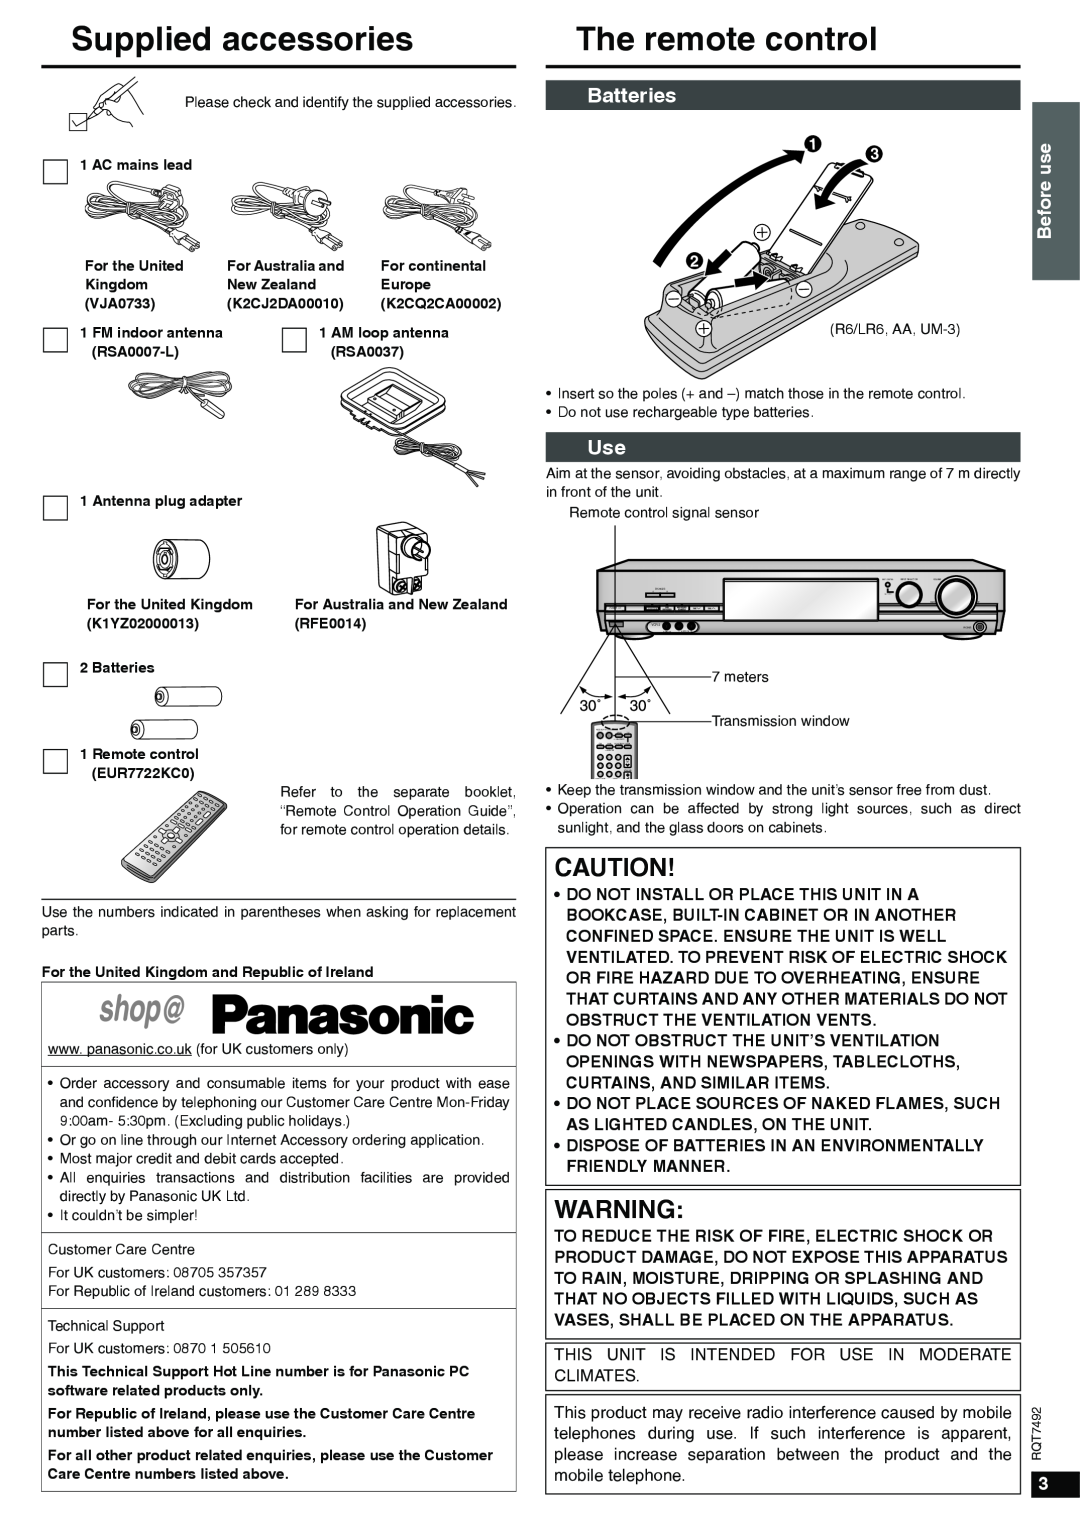 Panasonic SA-XR50 specifications Supplied accessories, The remote control, Batteries, Before use 